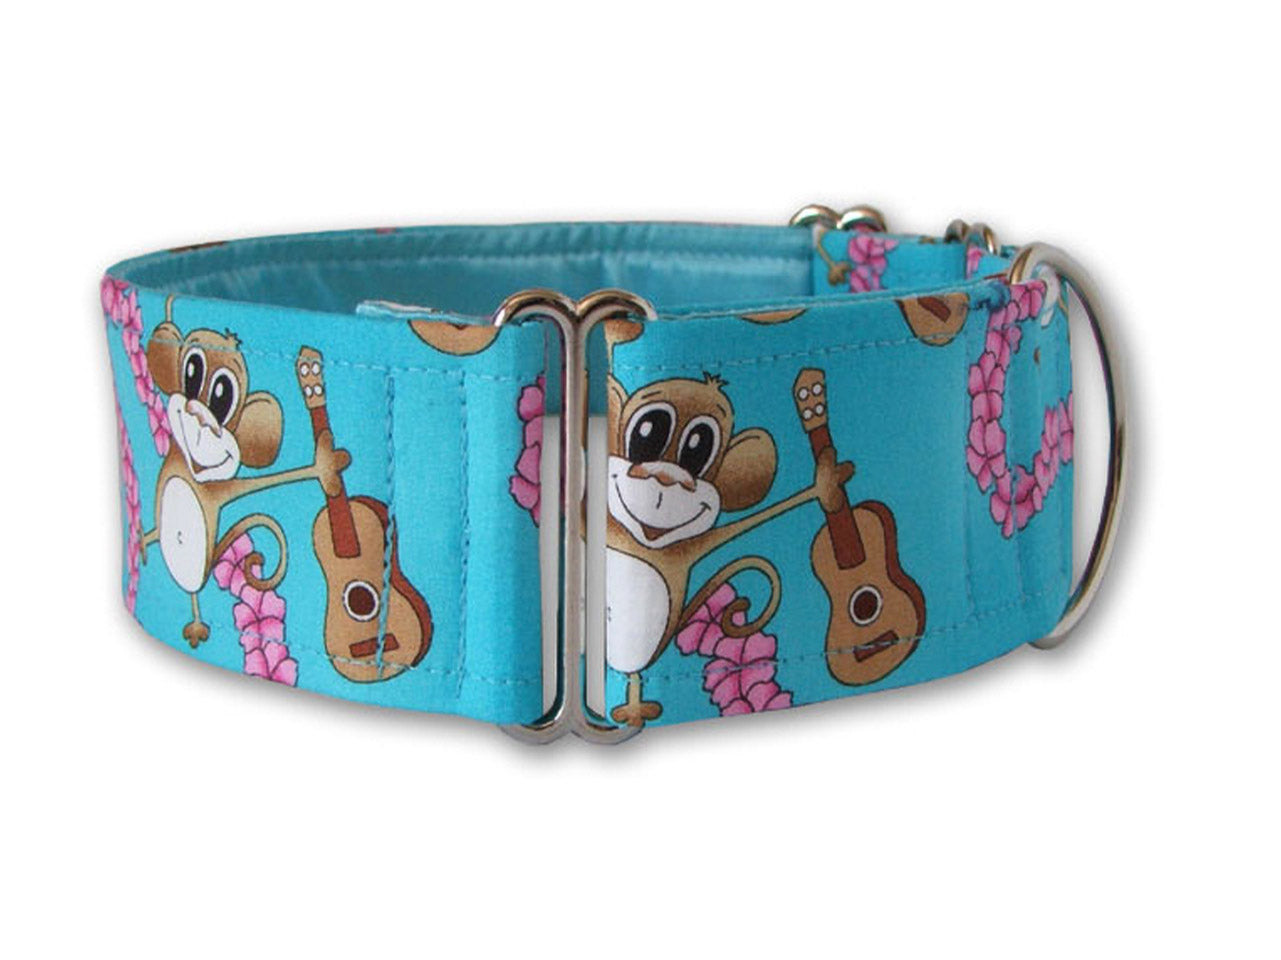 The cheerful ukulele-playing chimp on this bright blue collar will help your pup get his aloha on!